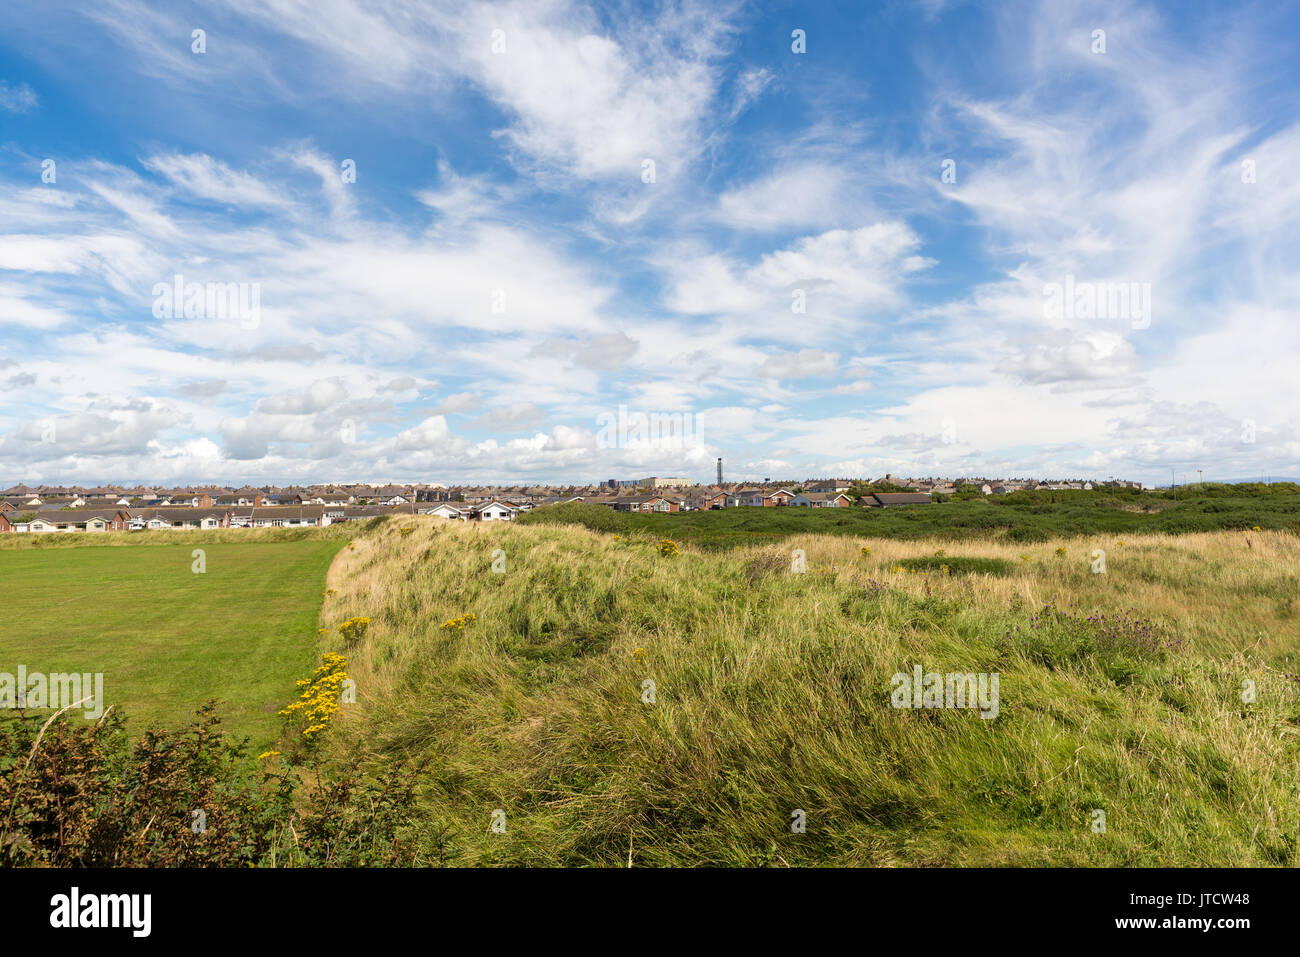 Looking across fields and the rooftops of Vickerstown, Walney Island, Barrow-in-Furness, Cumbria, UK towards BAE Systems submarine hangers. Stock Photo